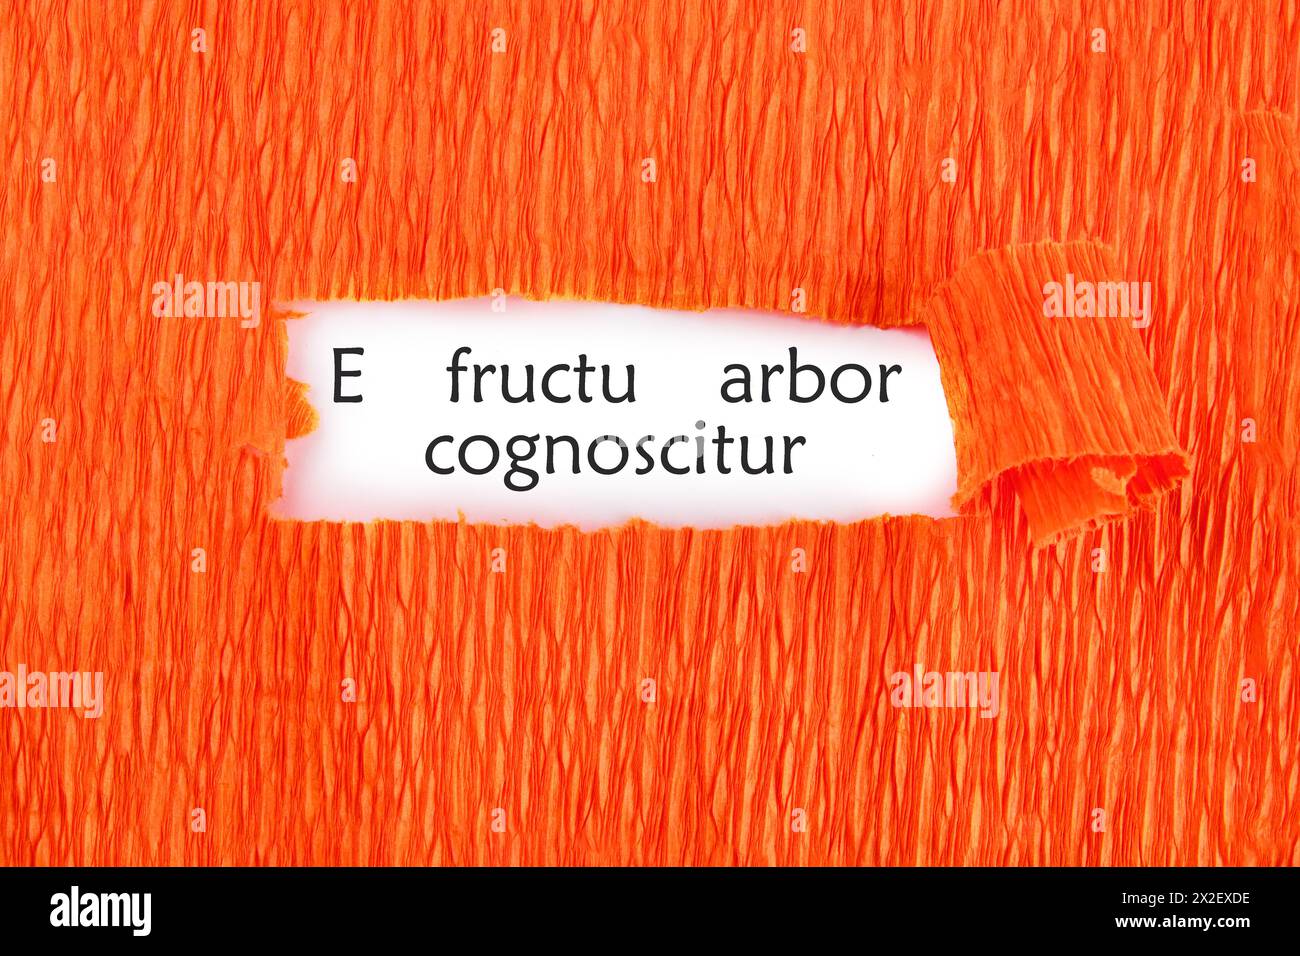 E fructu arbor cognoscitur the phrase in Latin translates as the Tree is known by its fruits on a white sheet under an orange background Stock Photo